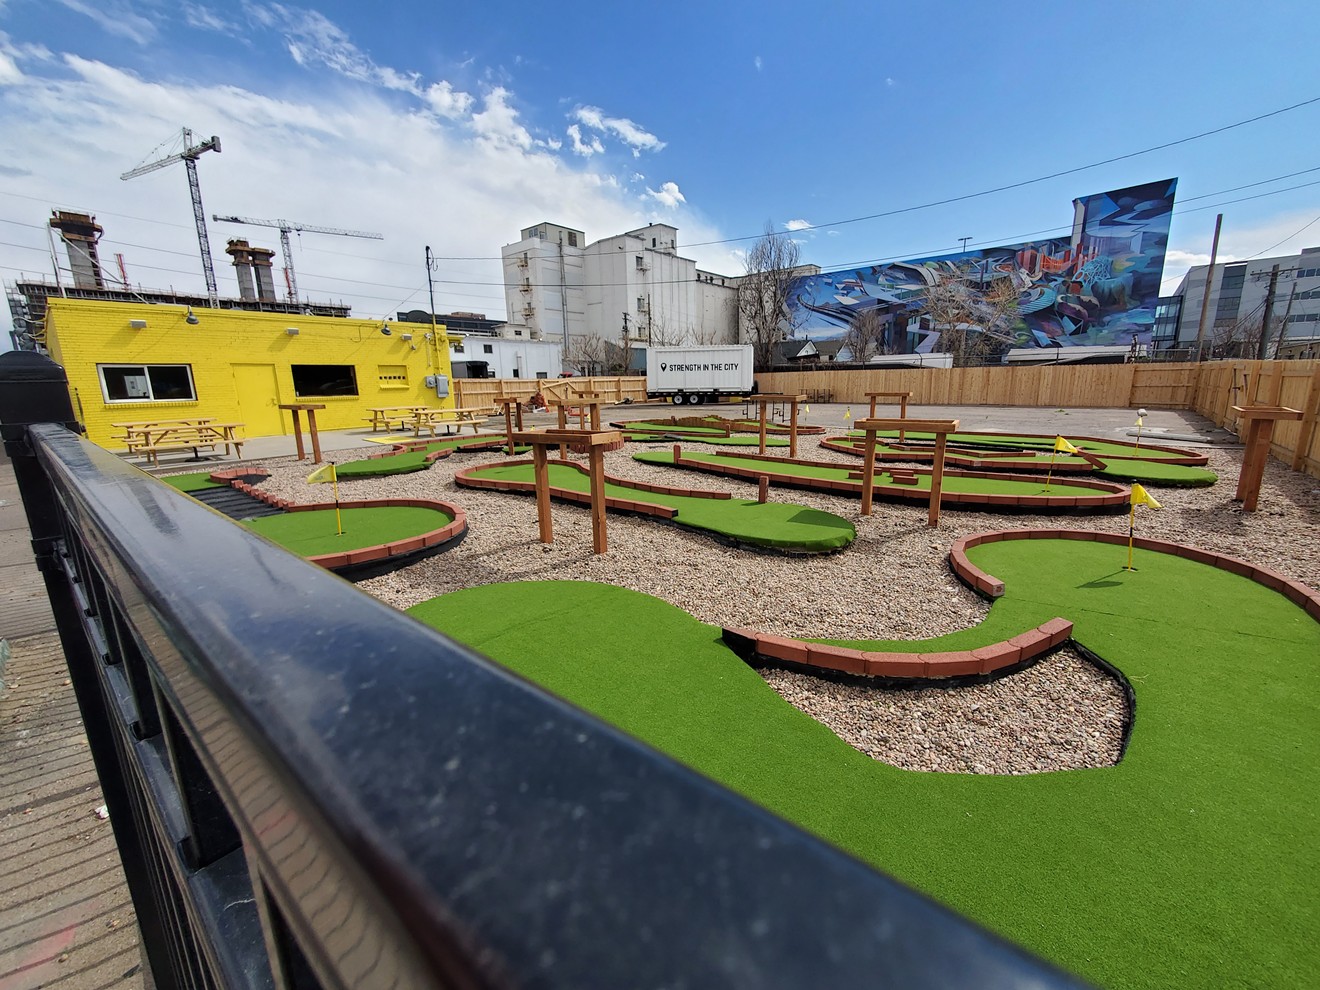 Mini golf holes are just part of the fun at RiNo Country Club.